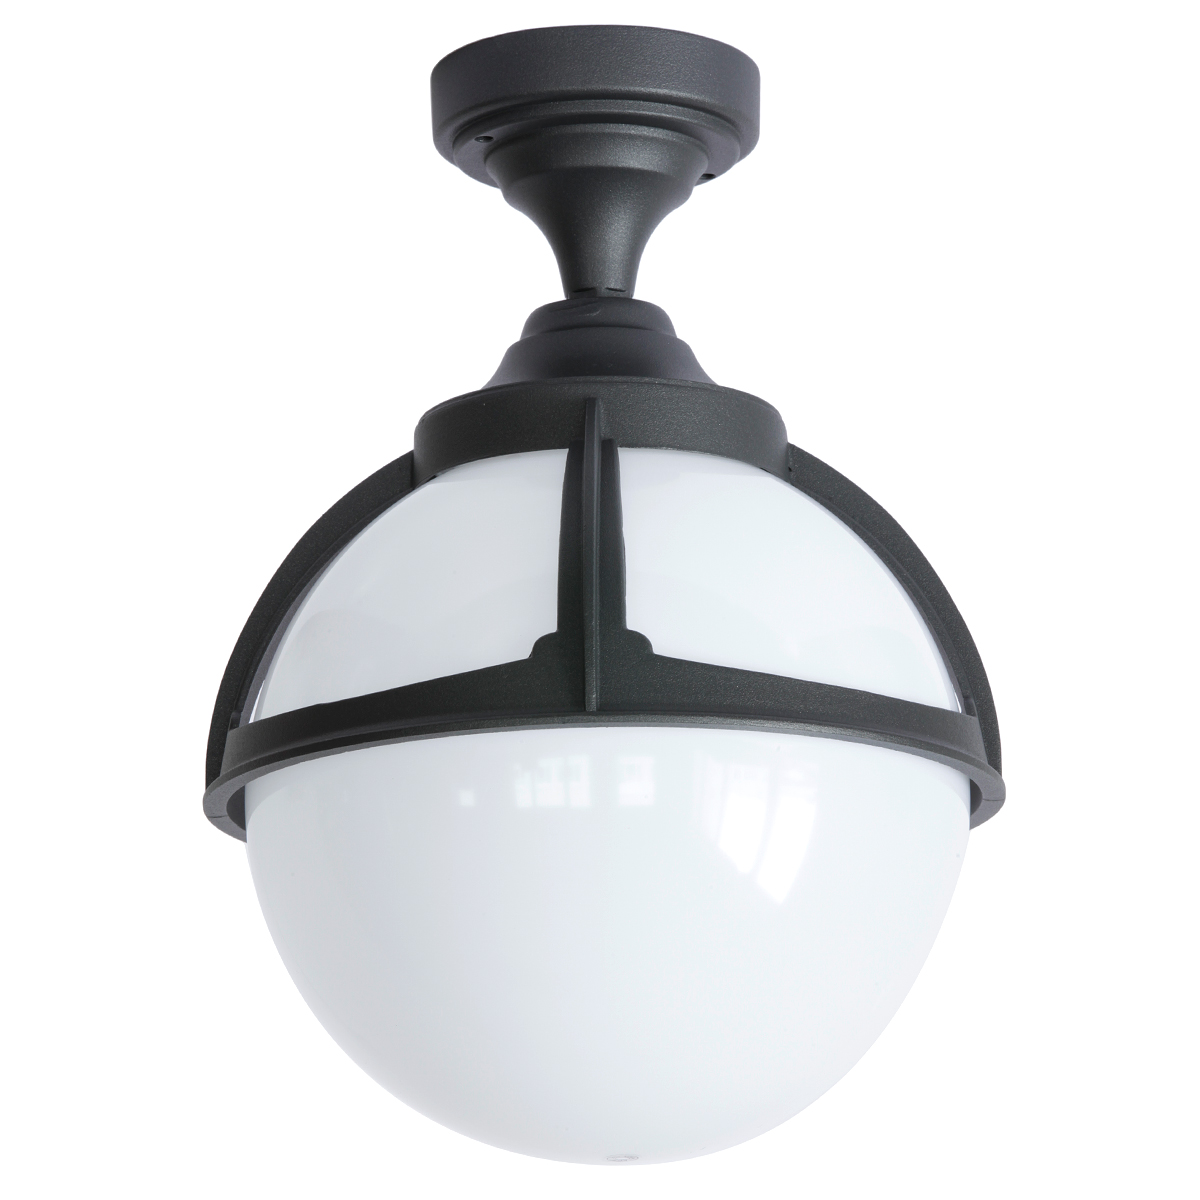 Ceiling Lamp for Outdoors with PMMA Glass Ball